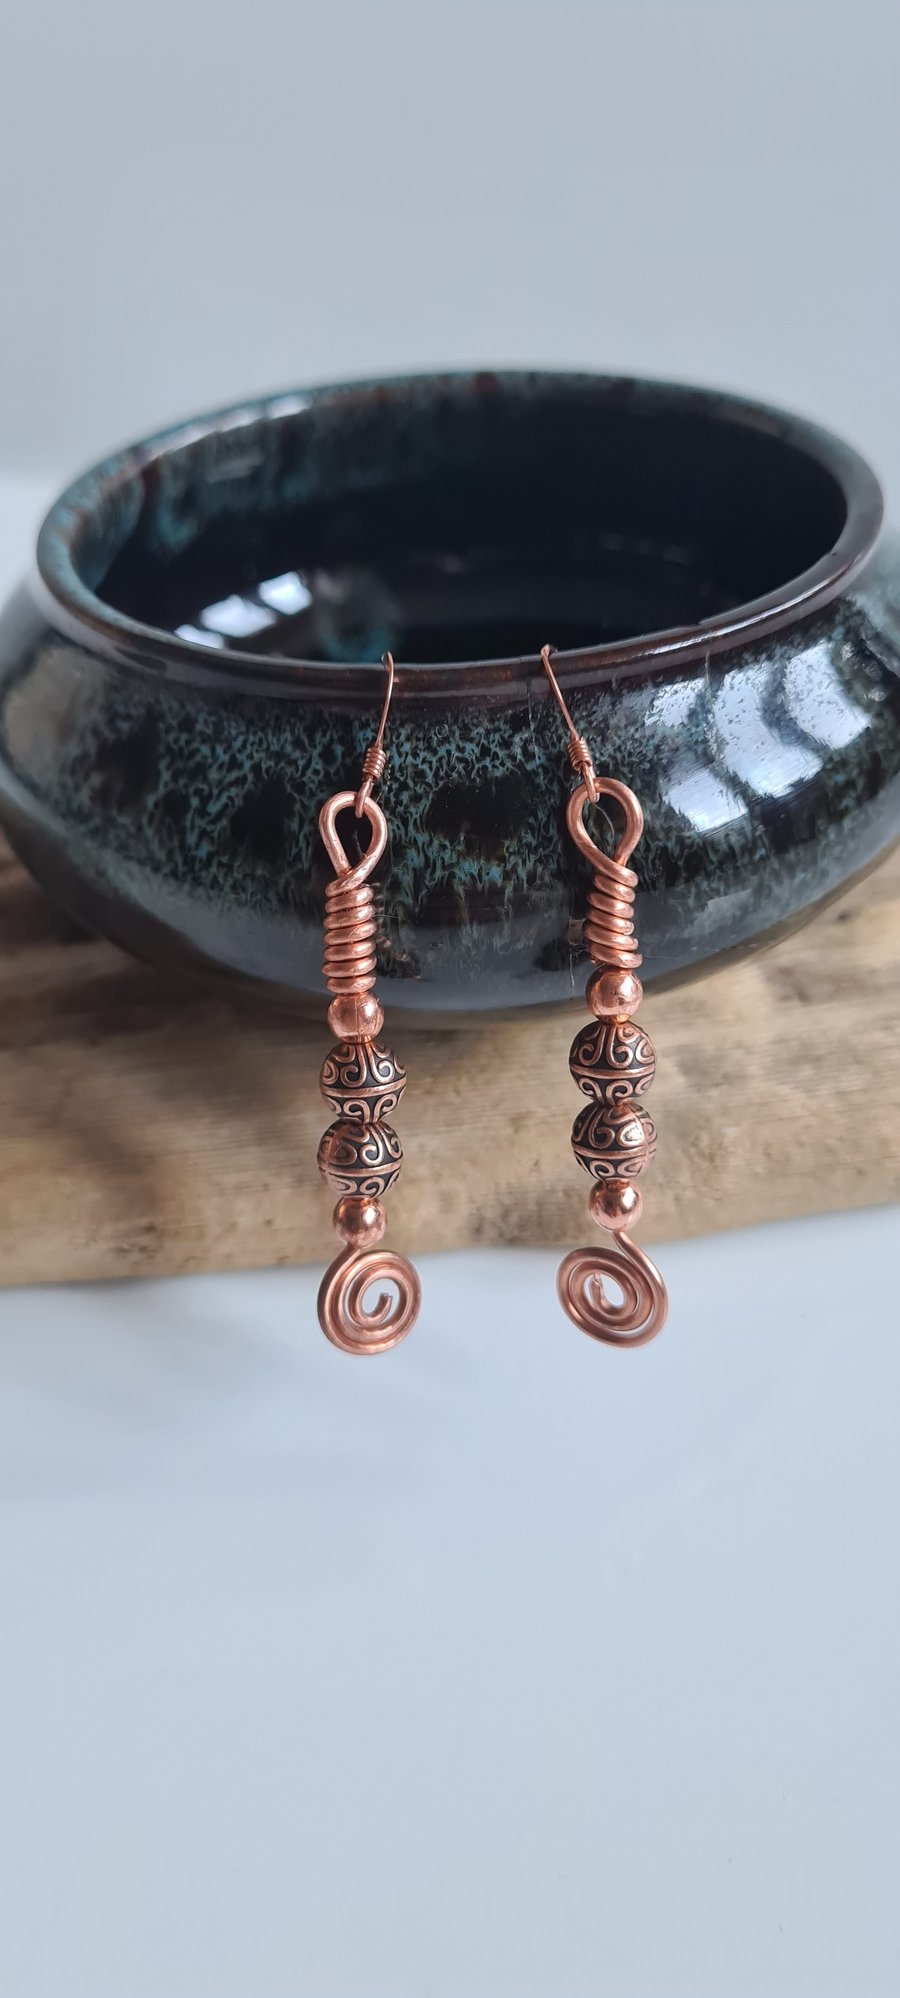 Handmade Beautiful Copper Beaded Earrings Gift Boxed Matching Pendant Available